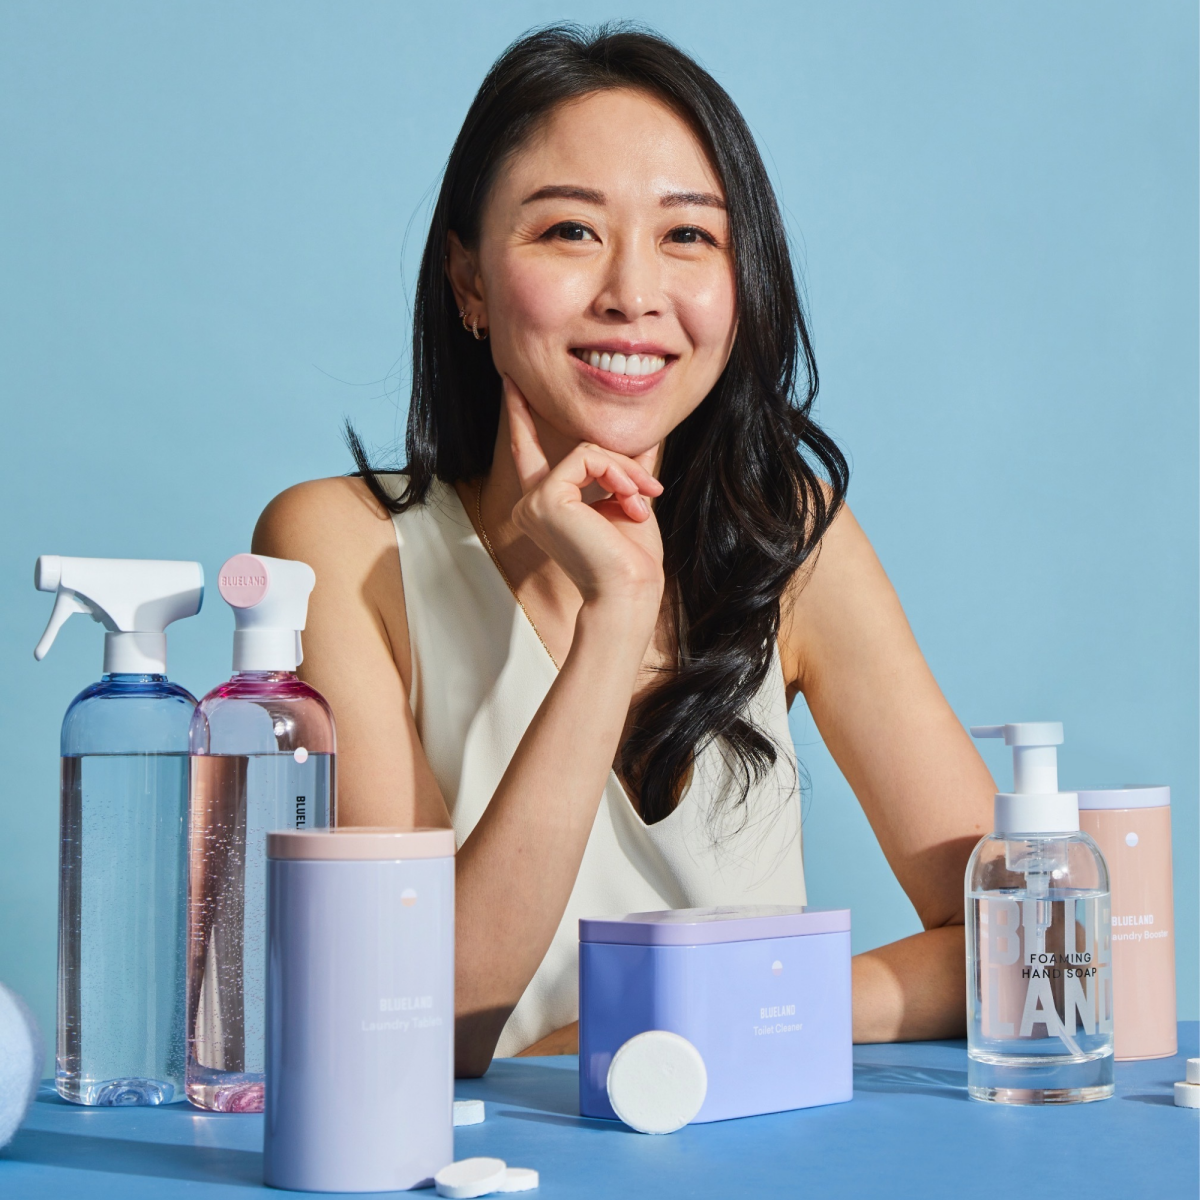 https://api.c2ccertified.org/img/containers/media_library/blogsandevents/sarah-paiji-yoo-reimagining-cleaning-products-without-single-use-plastic-packaging.png/a91daec0d067bd3fbac8c9960c71c095.png